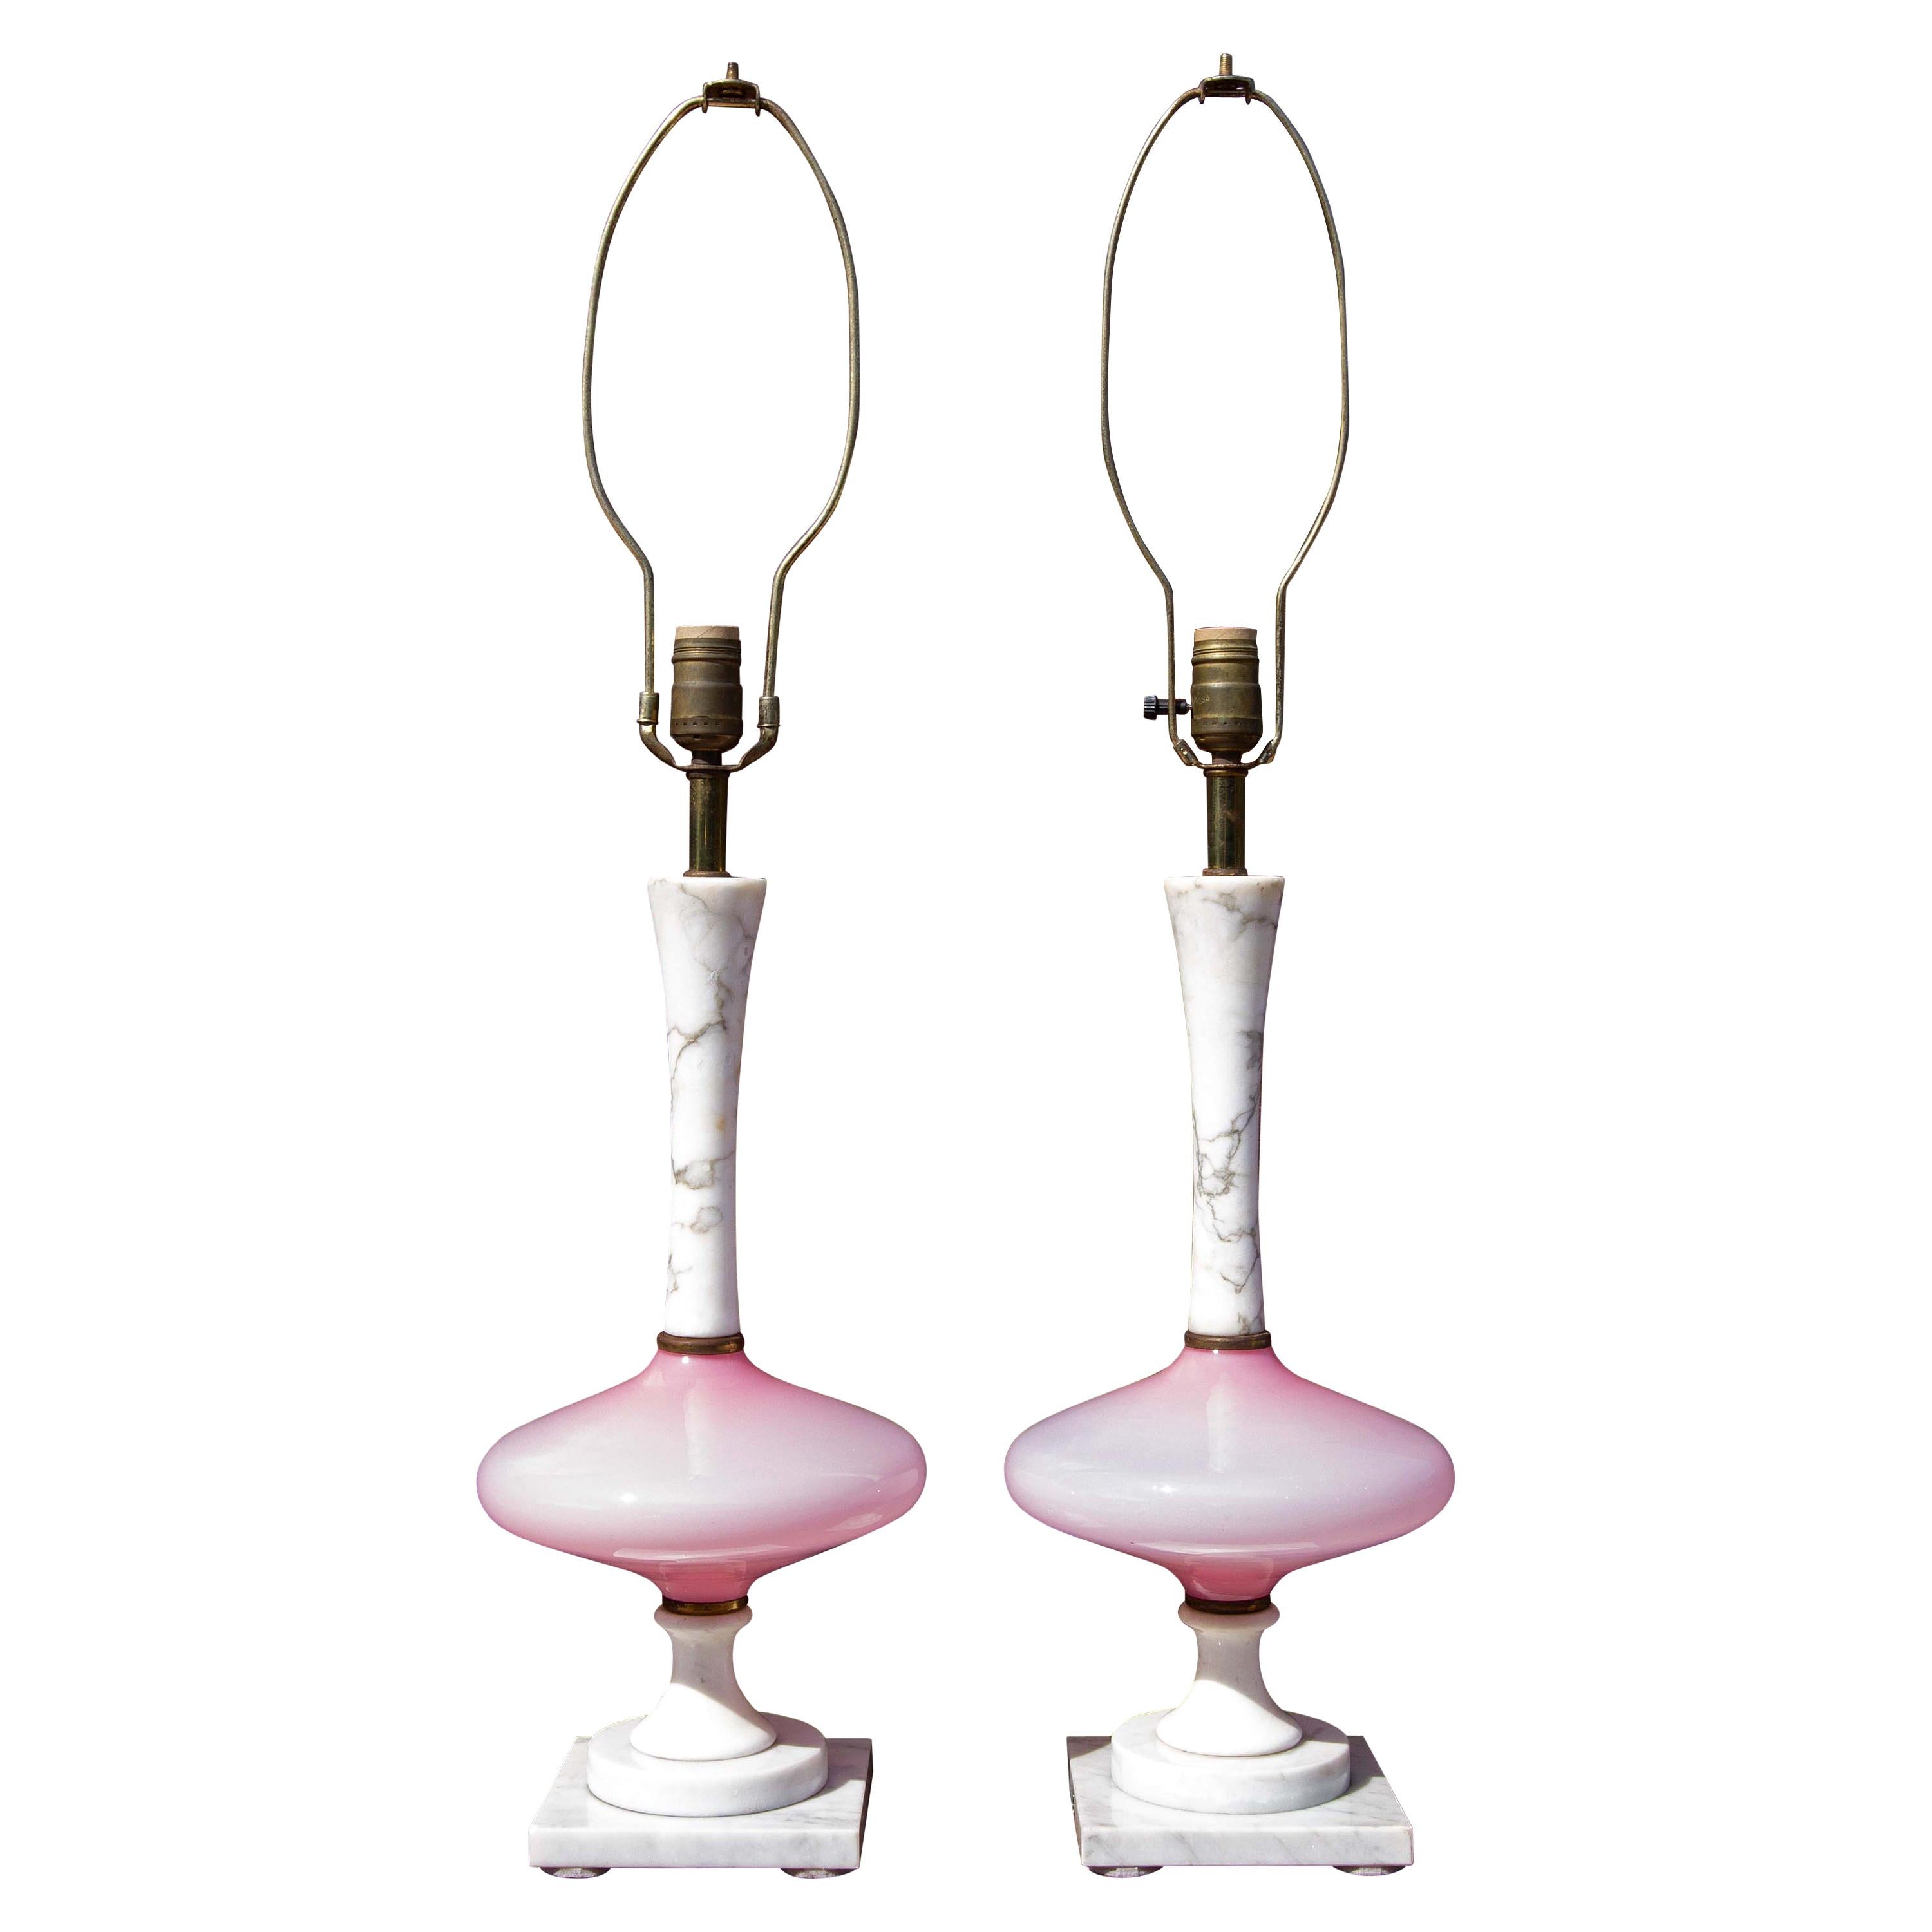 Pair of Murano Glass Pink and White Lamps Vintage Mid-Century Modern